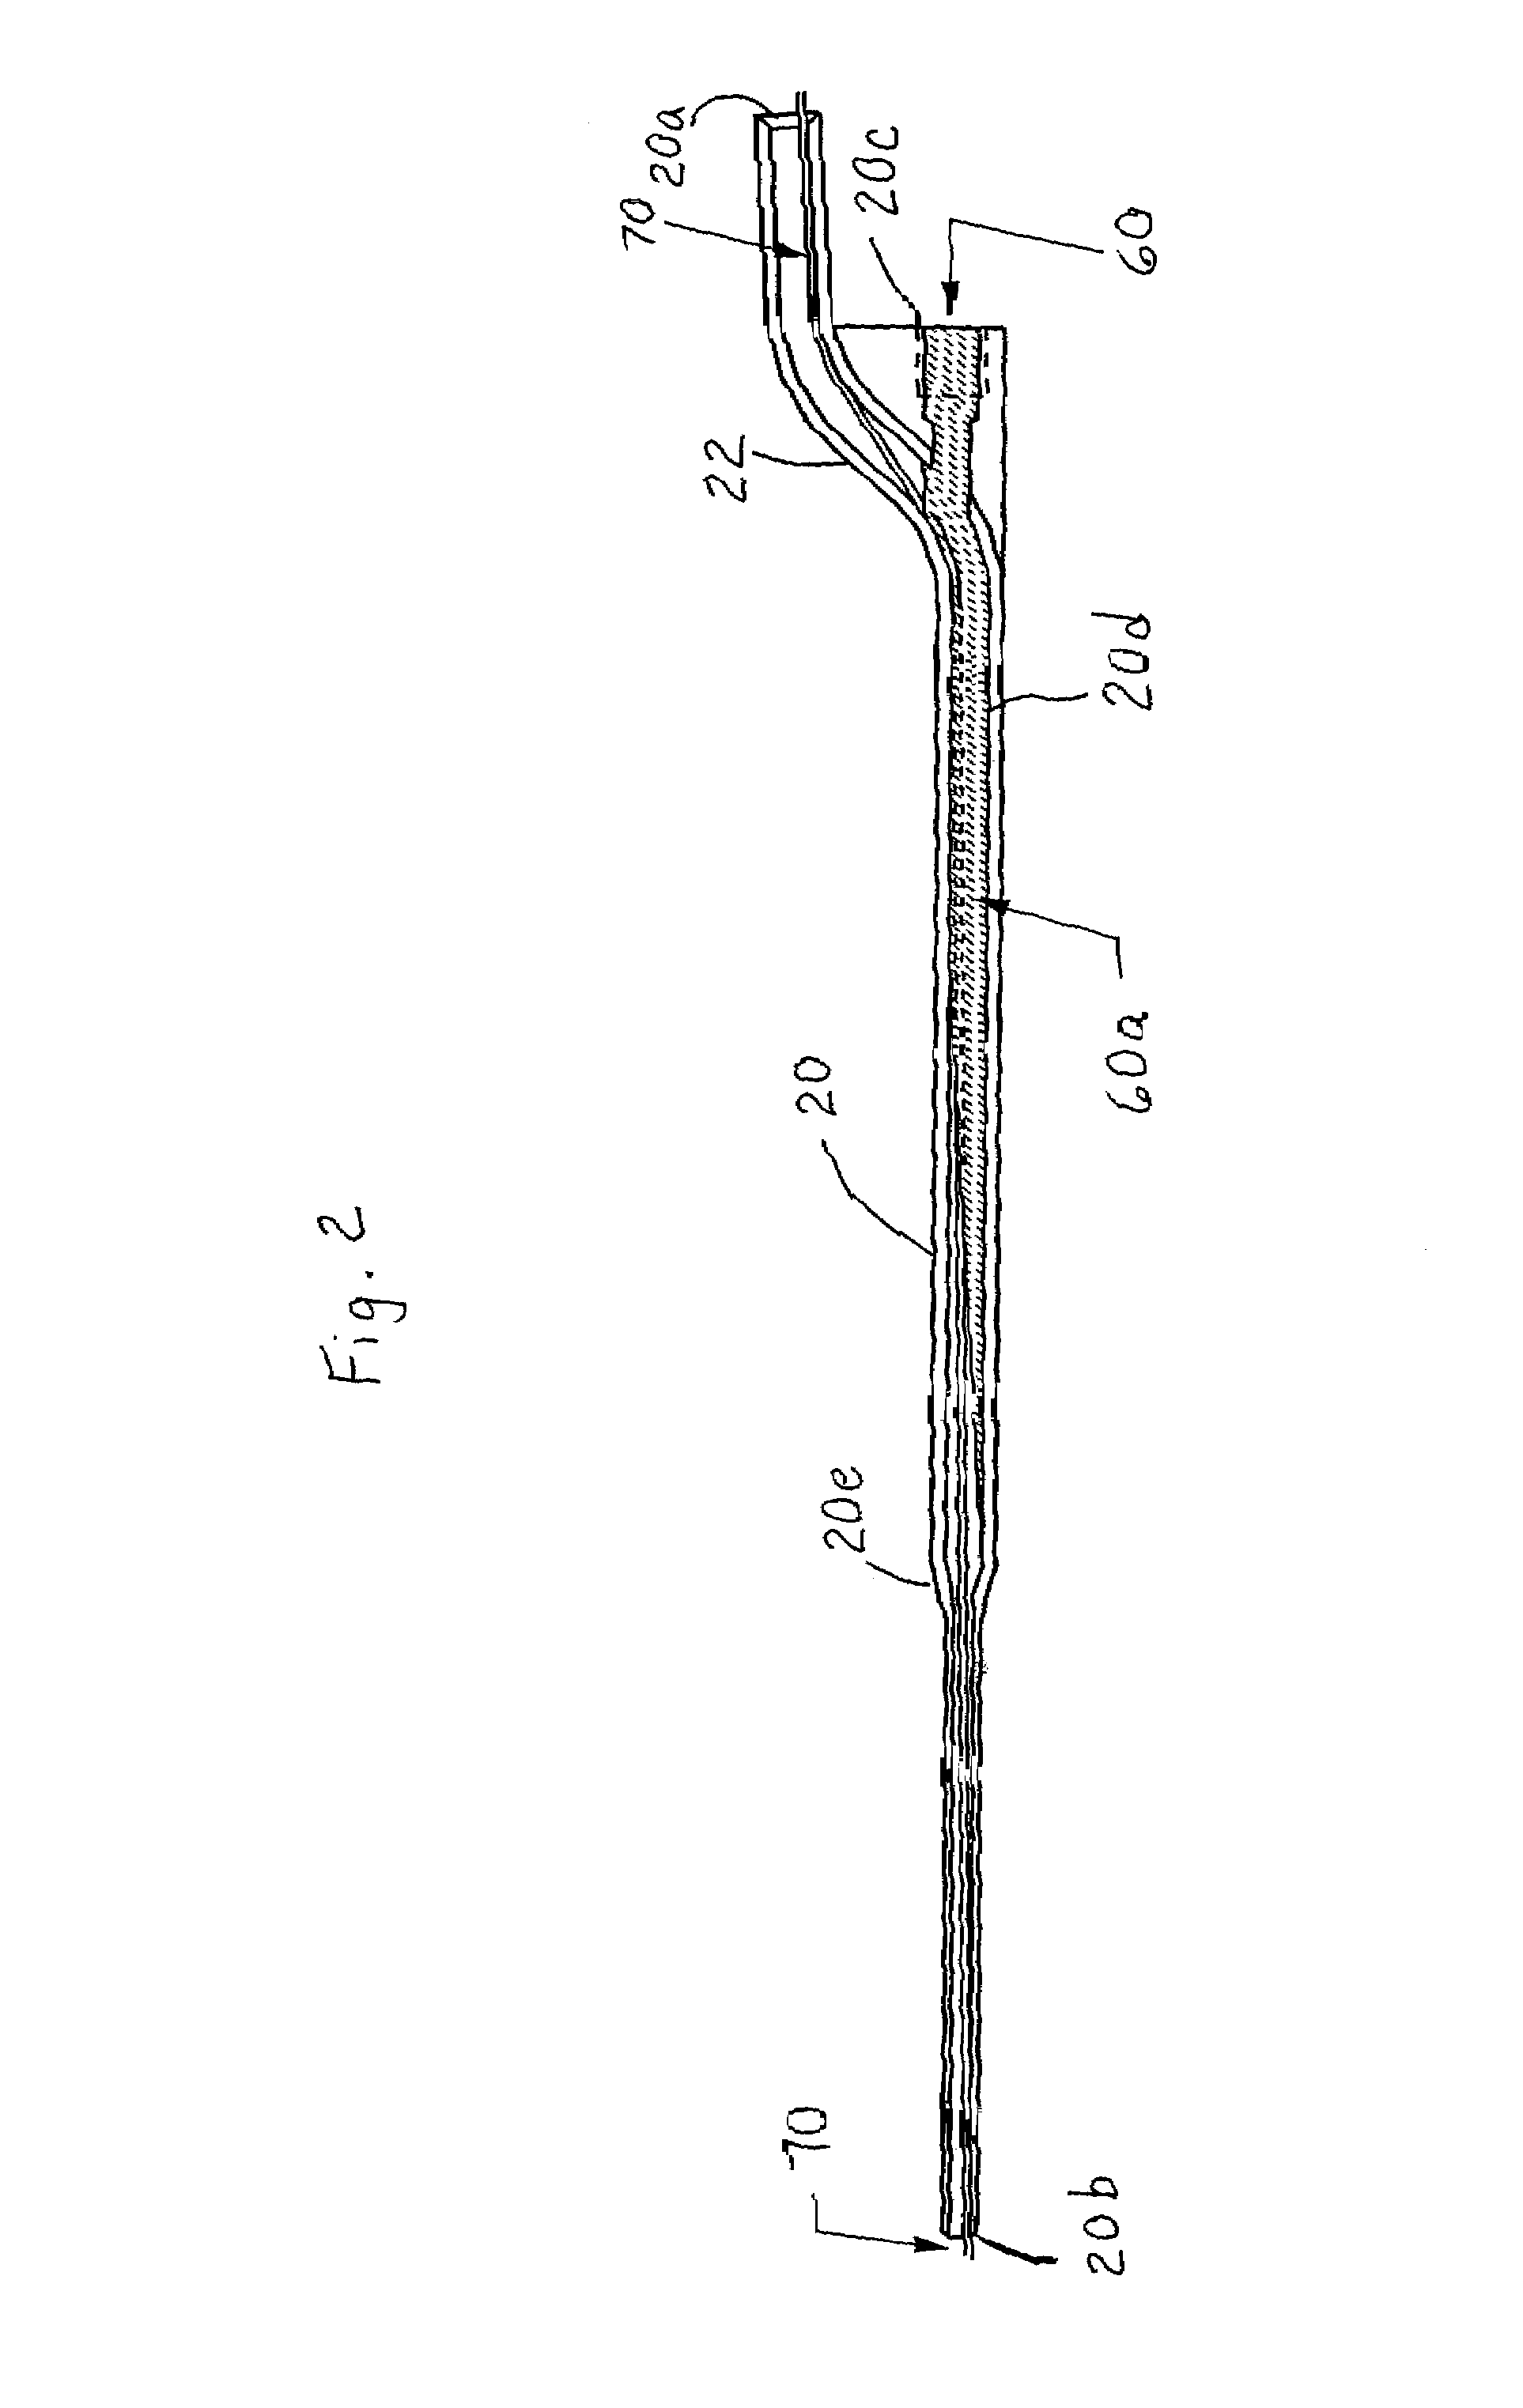 Method and apparatus for making cigarette filters with a centrally located flavored element